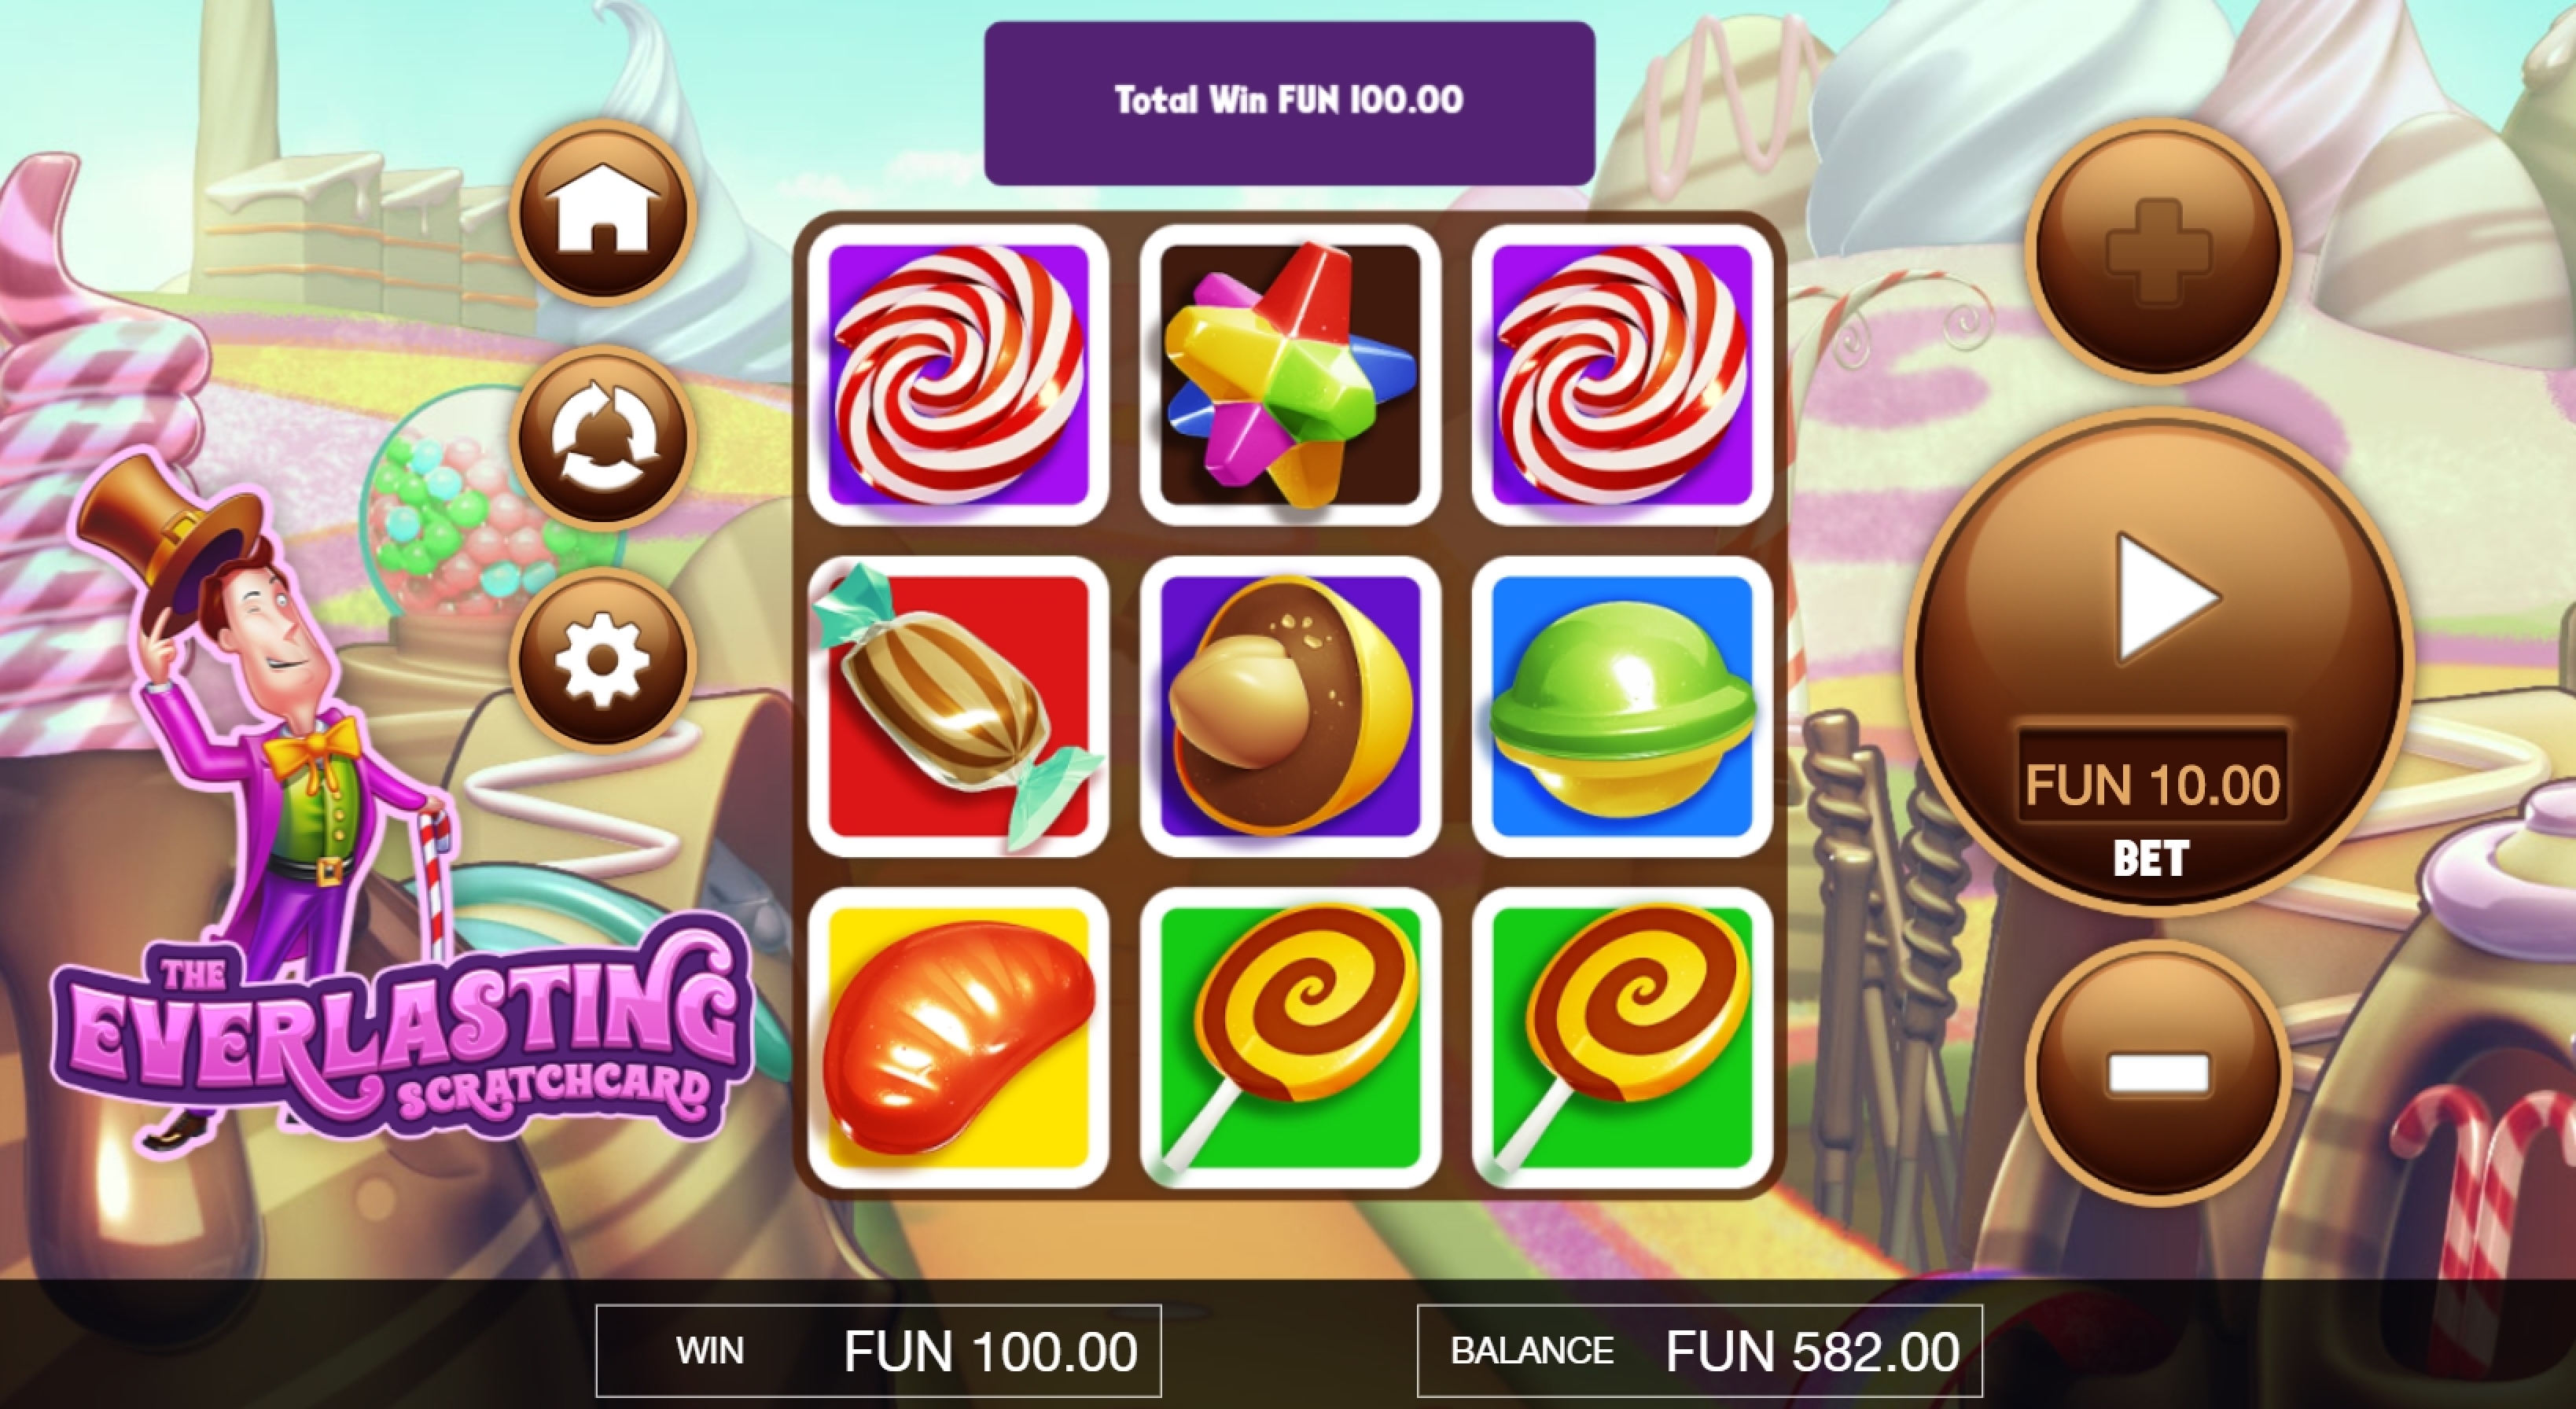 Win Money in The Everlasting Scratchcard Free Slot Game by Probability Jones